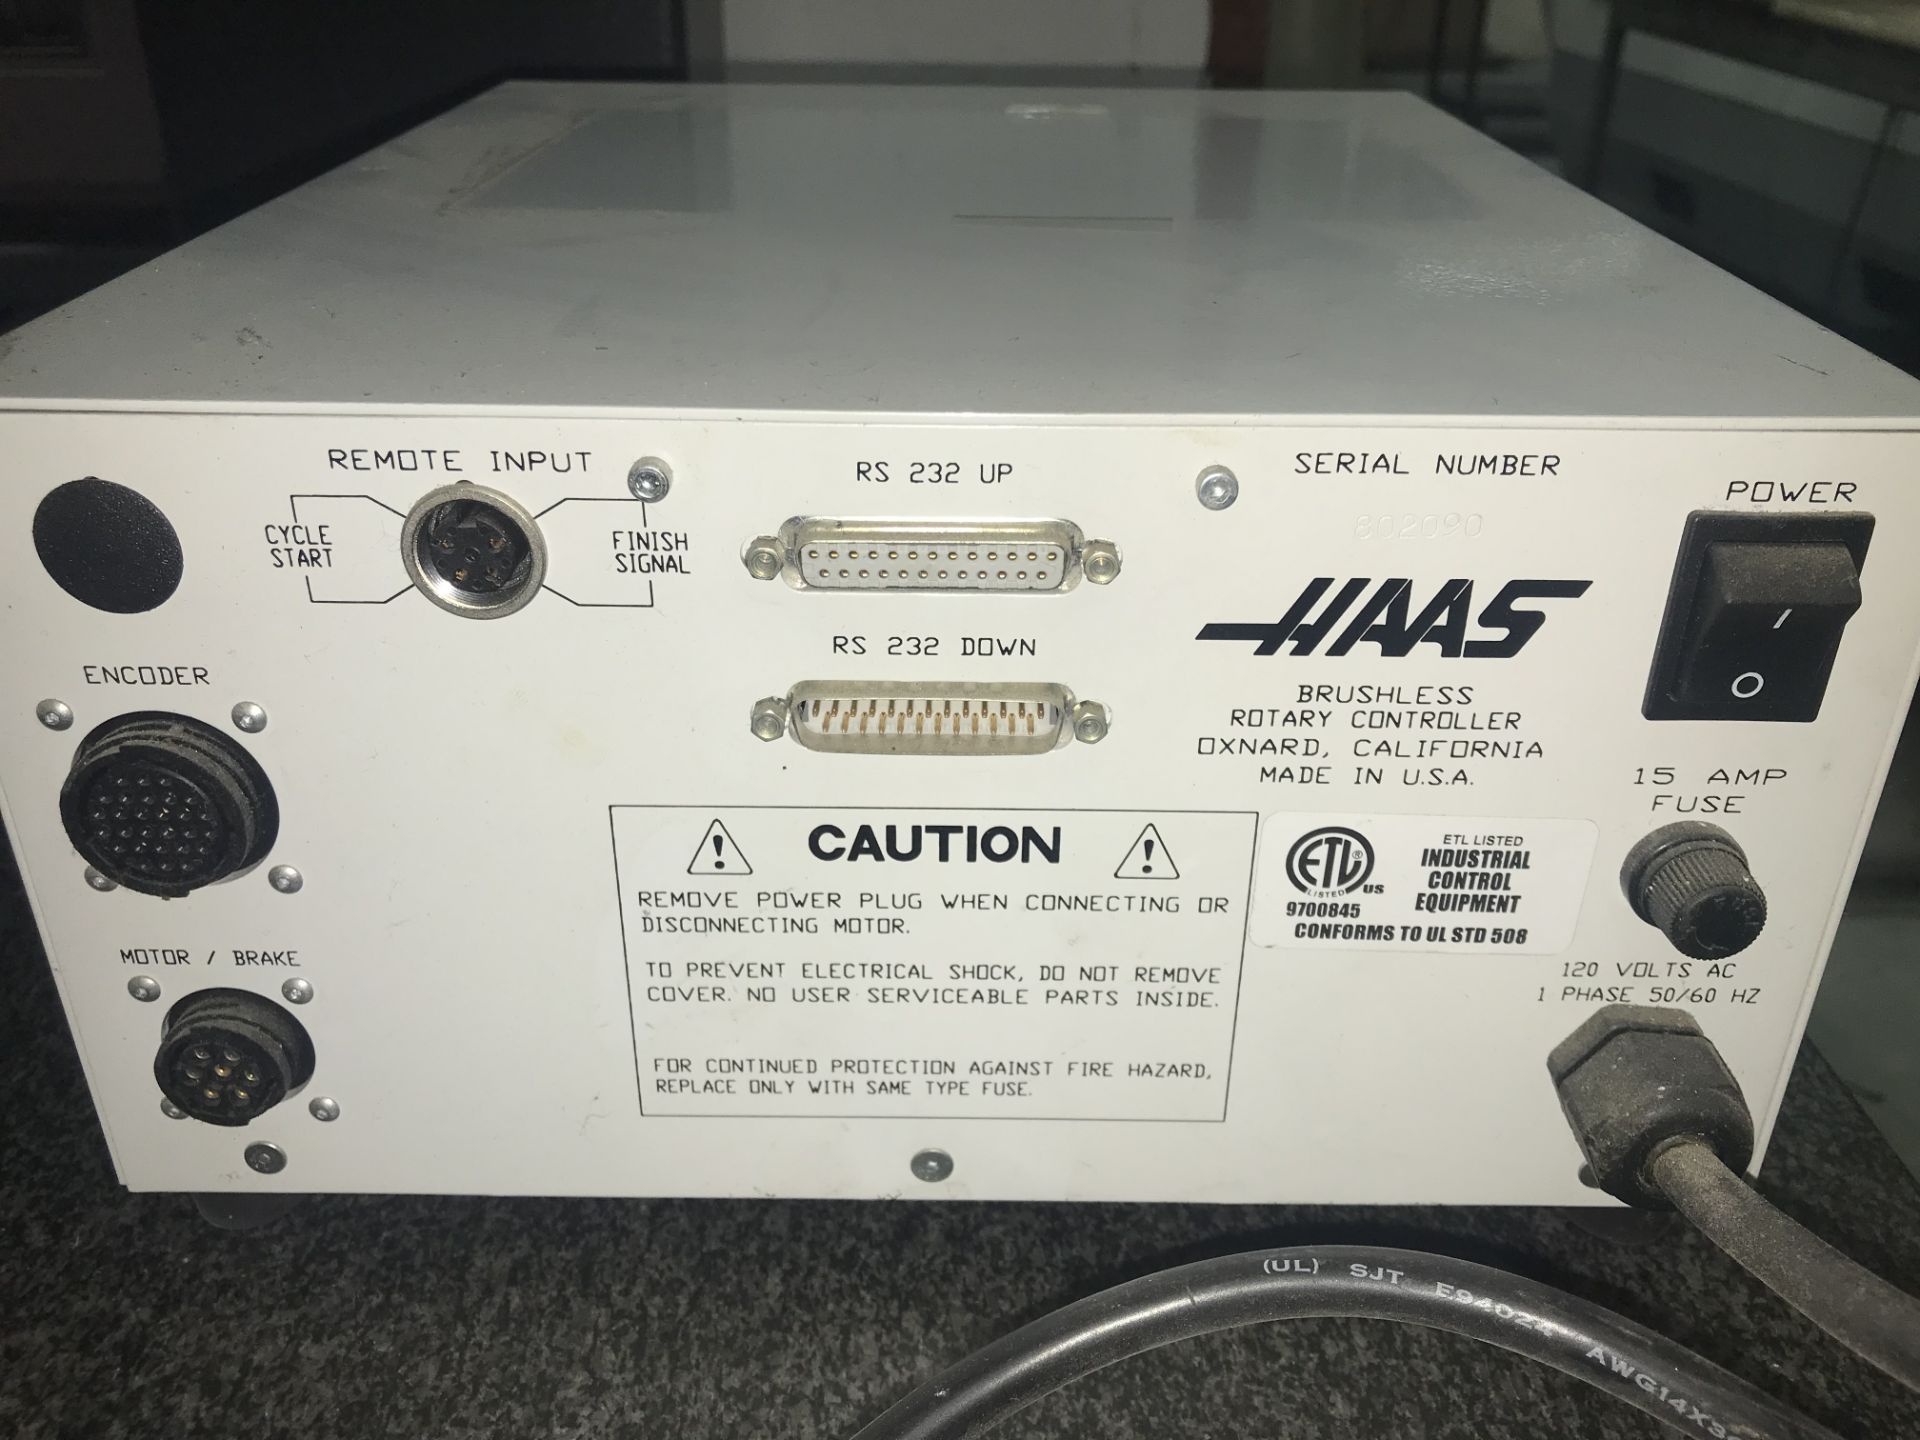 HAAS BRUSHLESS ROTARY CONTROL, NEVER USED, SN: 8020980 - Image 3 of 4